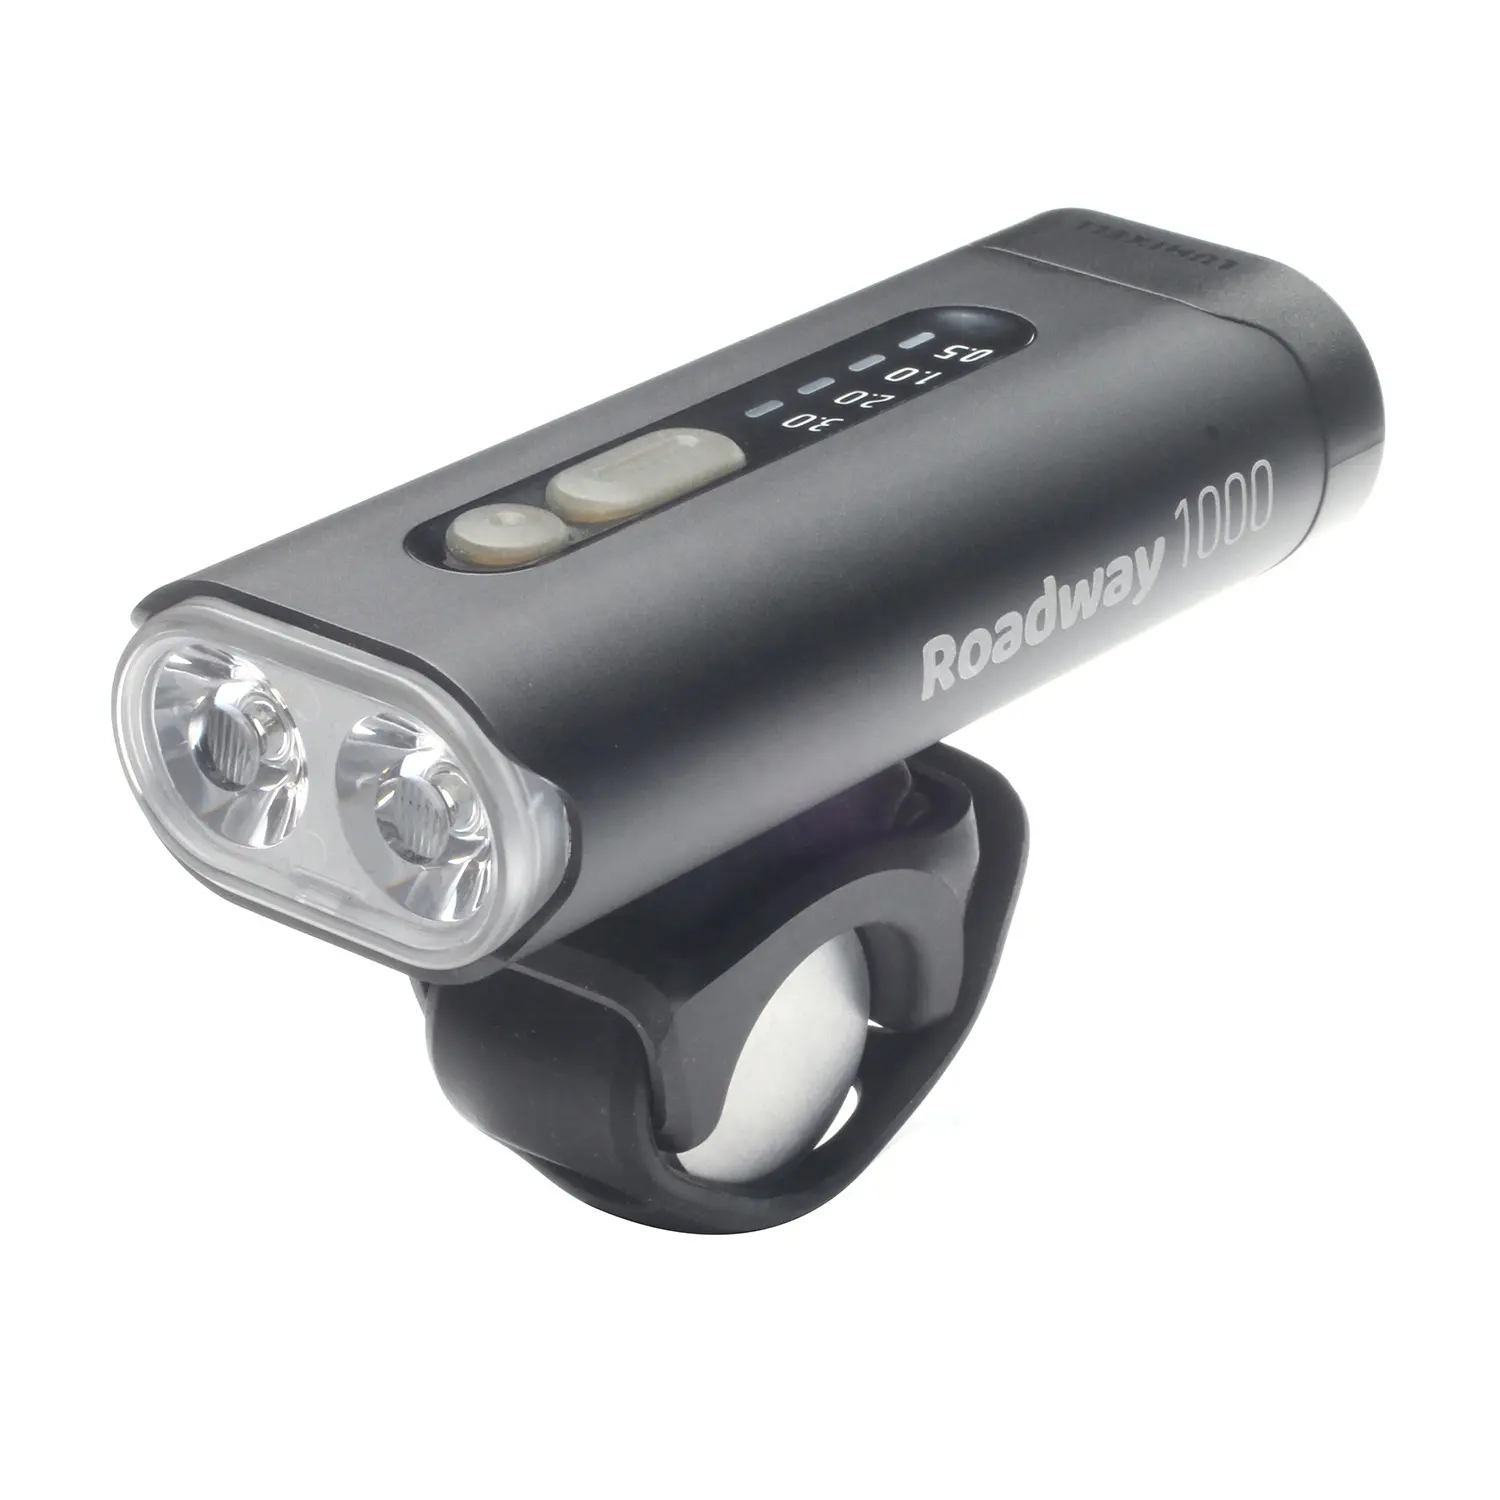 New Arrivals 2020 bike light usb rechargeable headlight 1000 Lumen with smart bicycle mount